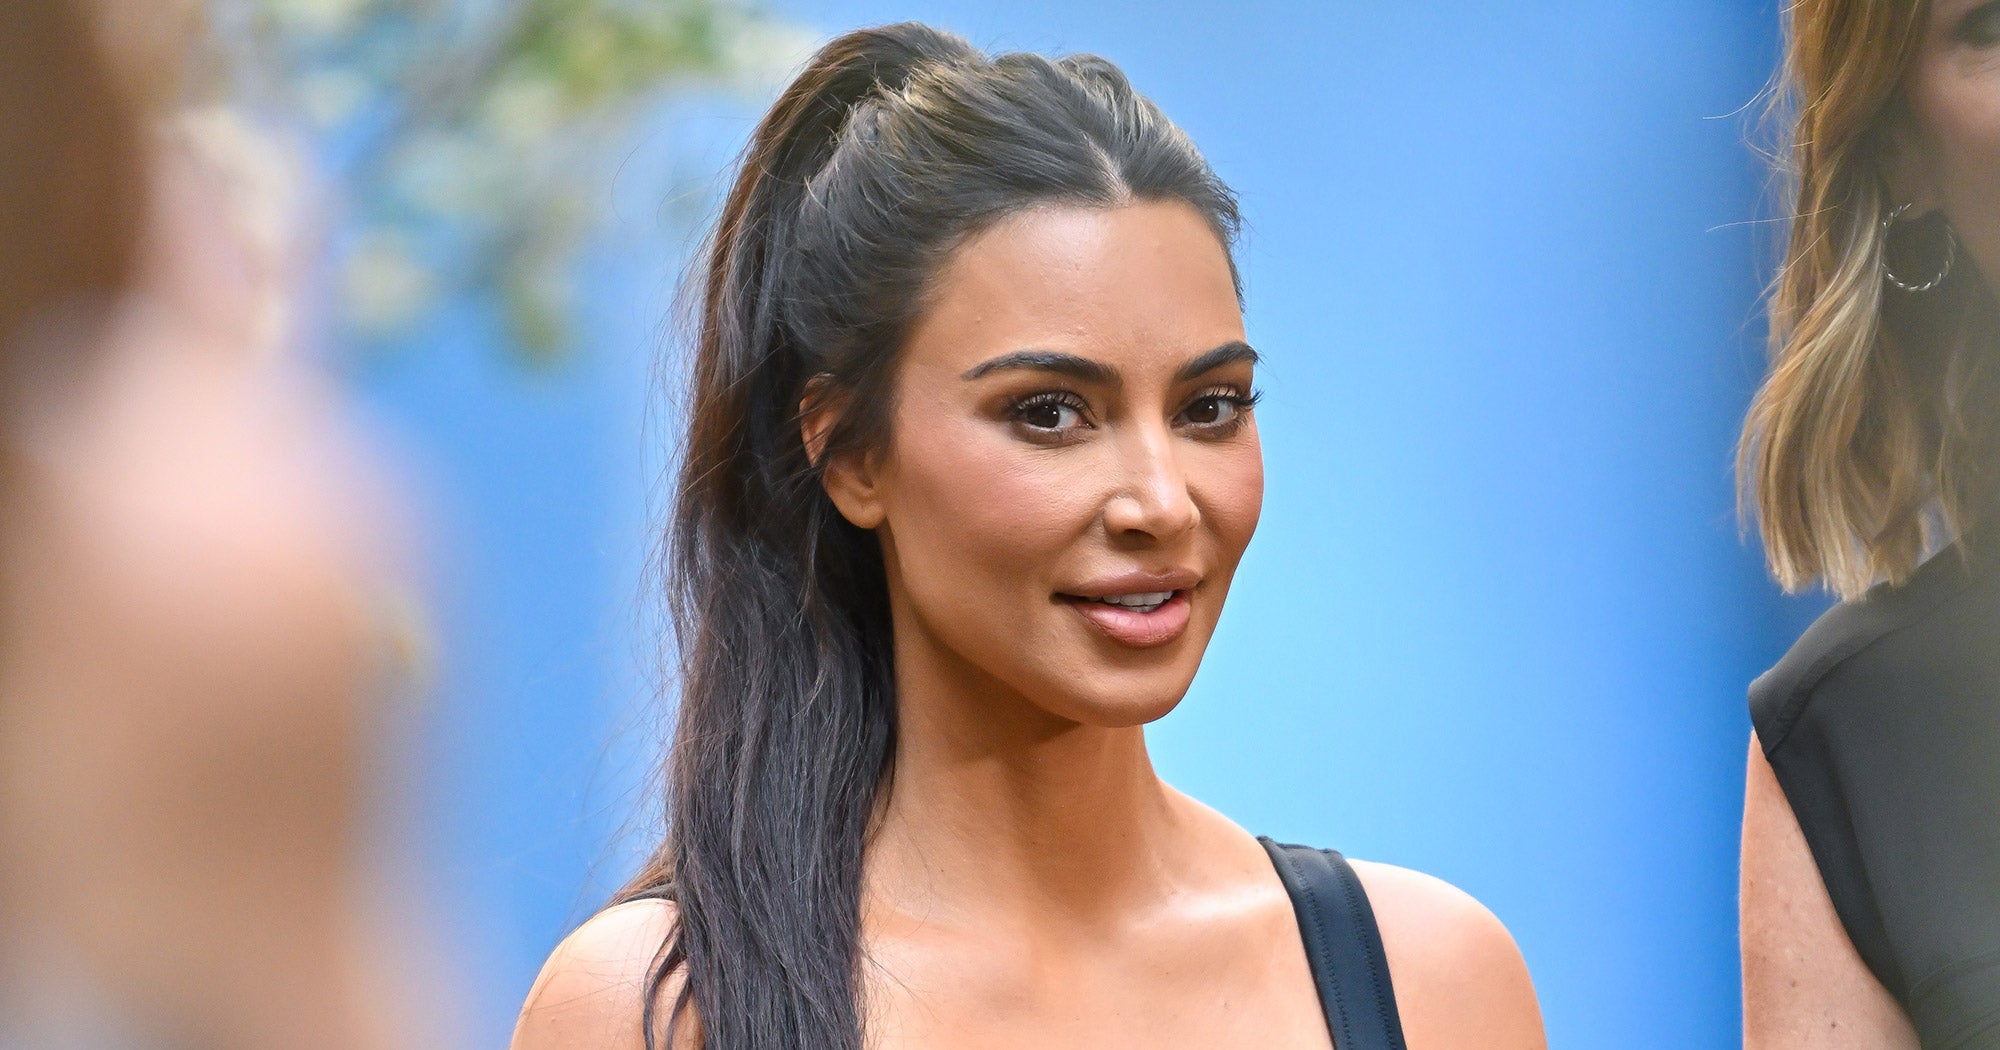 Kim Kardashian On Her Adult Acne: “If People Saw It They’d Be Really Shocked”